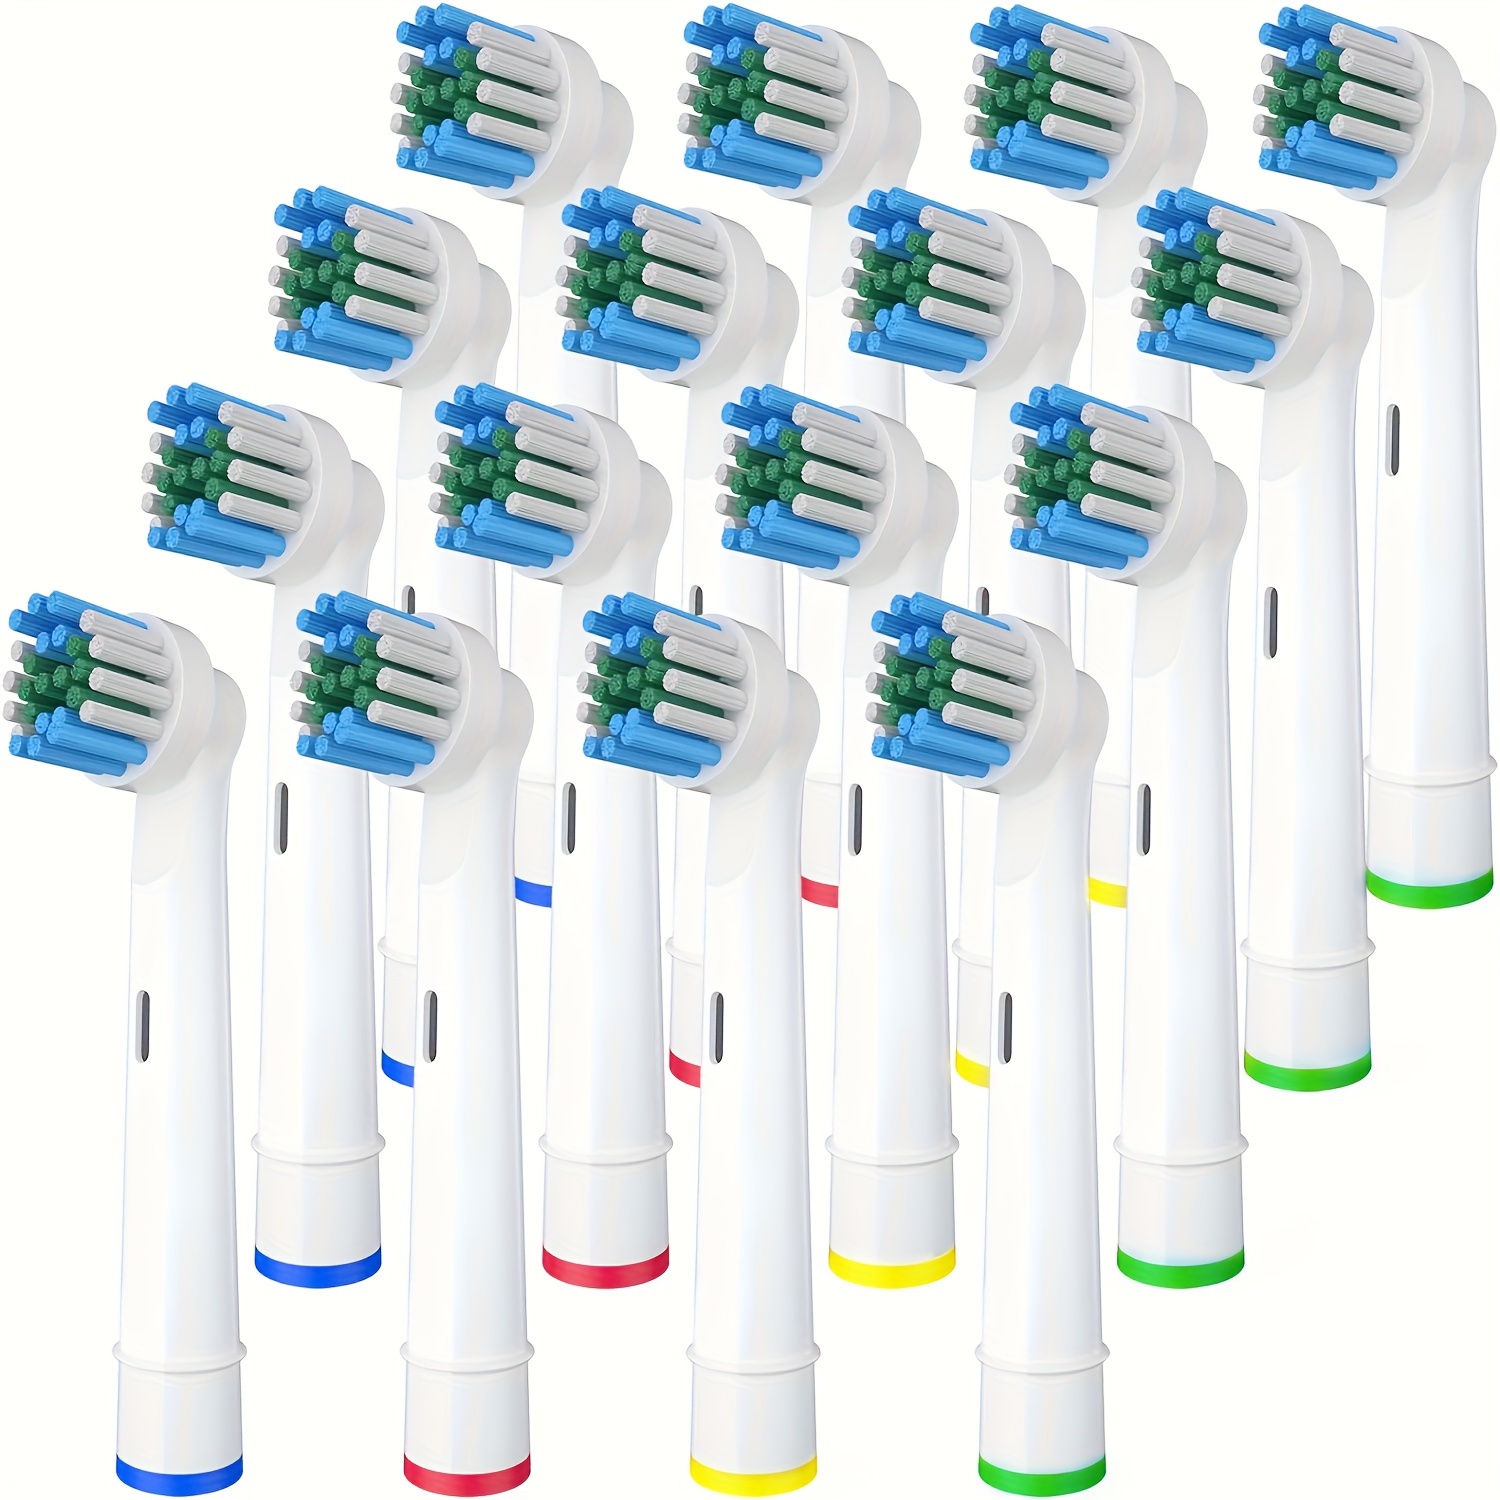 

16 Pack Soft Bristle Toothbrush Replacement Heads Compatible With Electric Toothbrush, Precision Clean Refill Heads For Pro 500/1000/1500/3000/3757/5000/7000/7500/